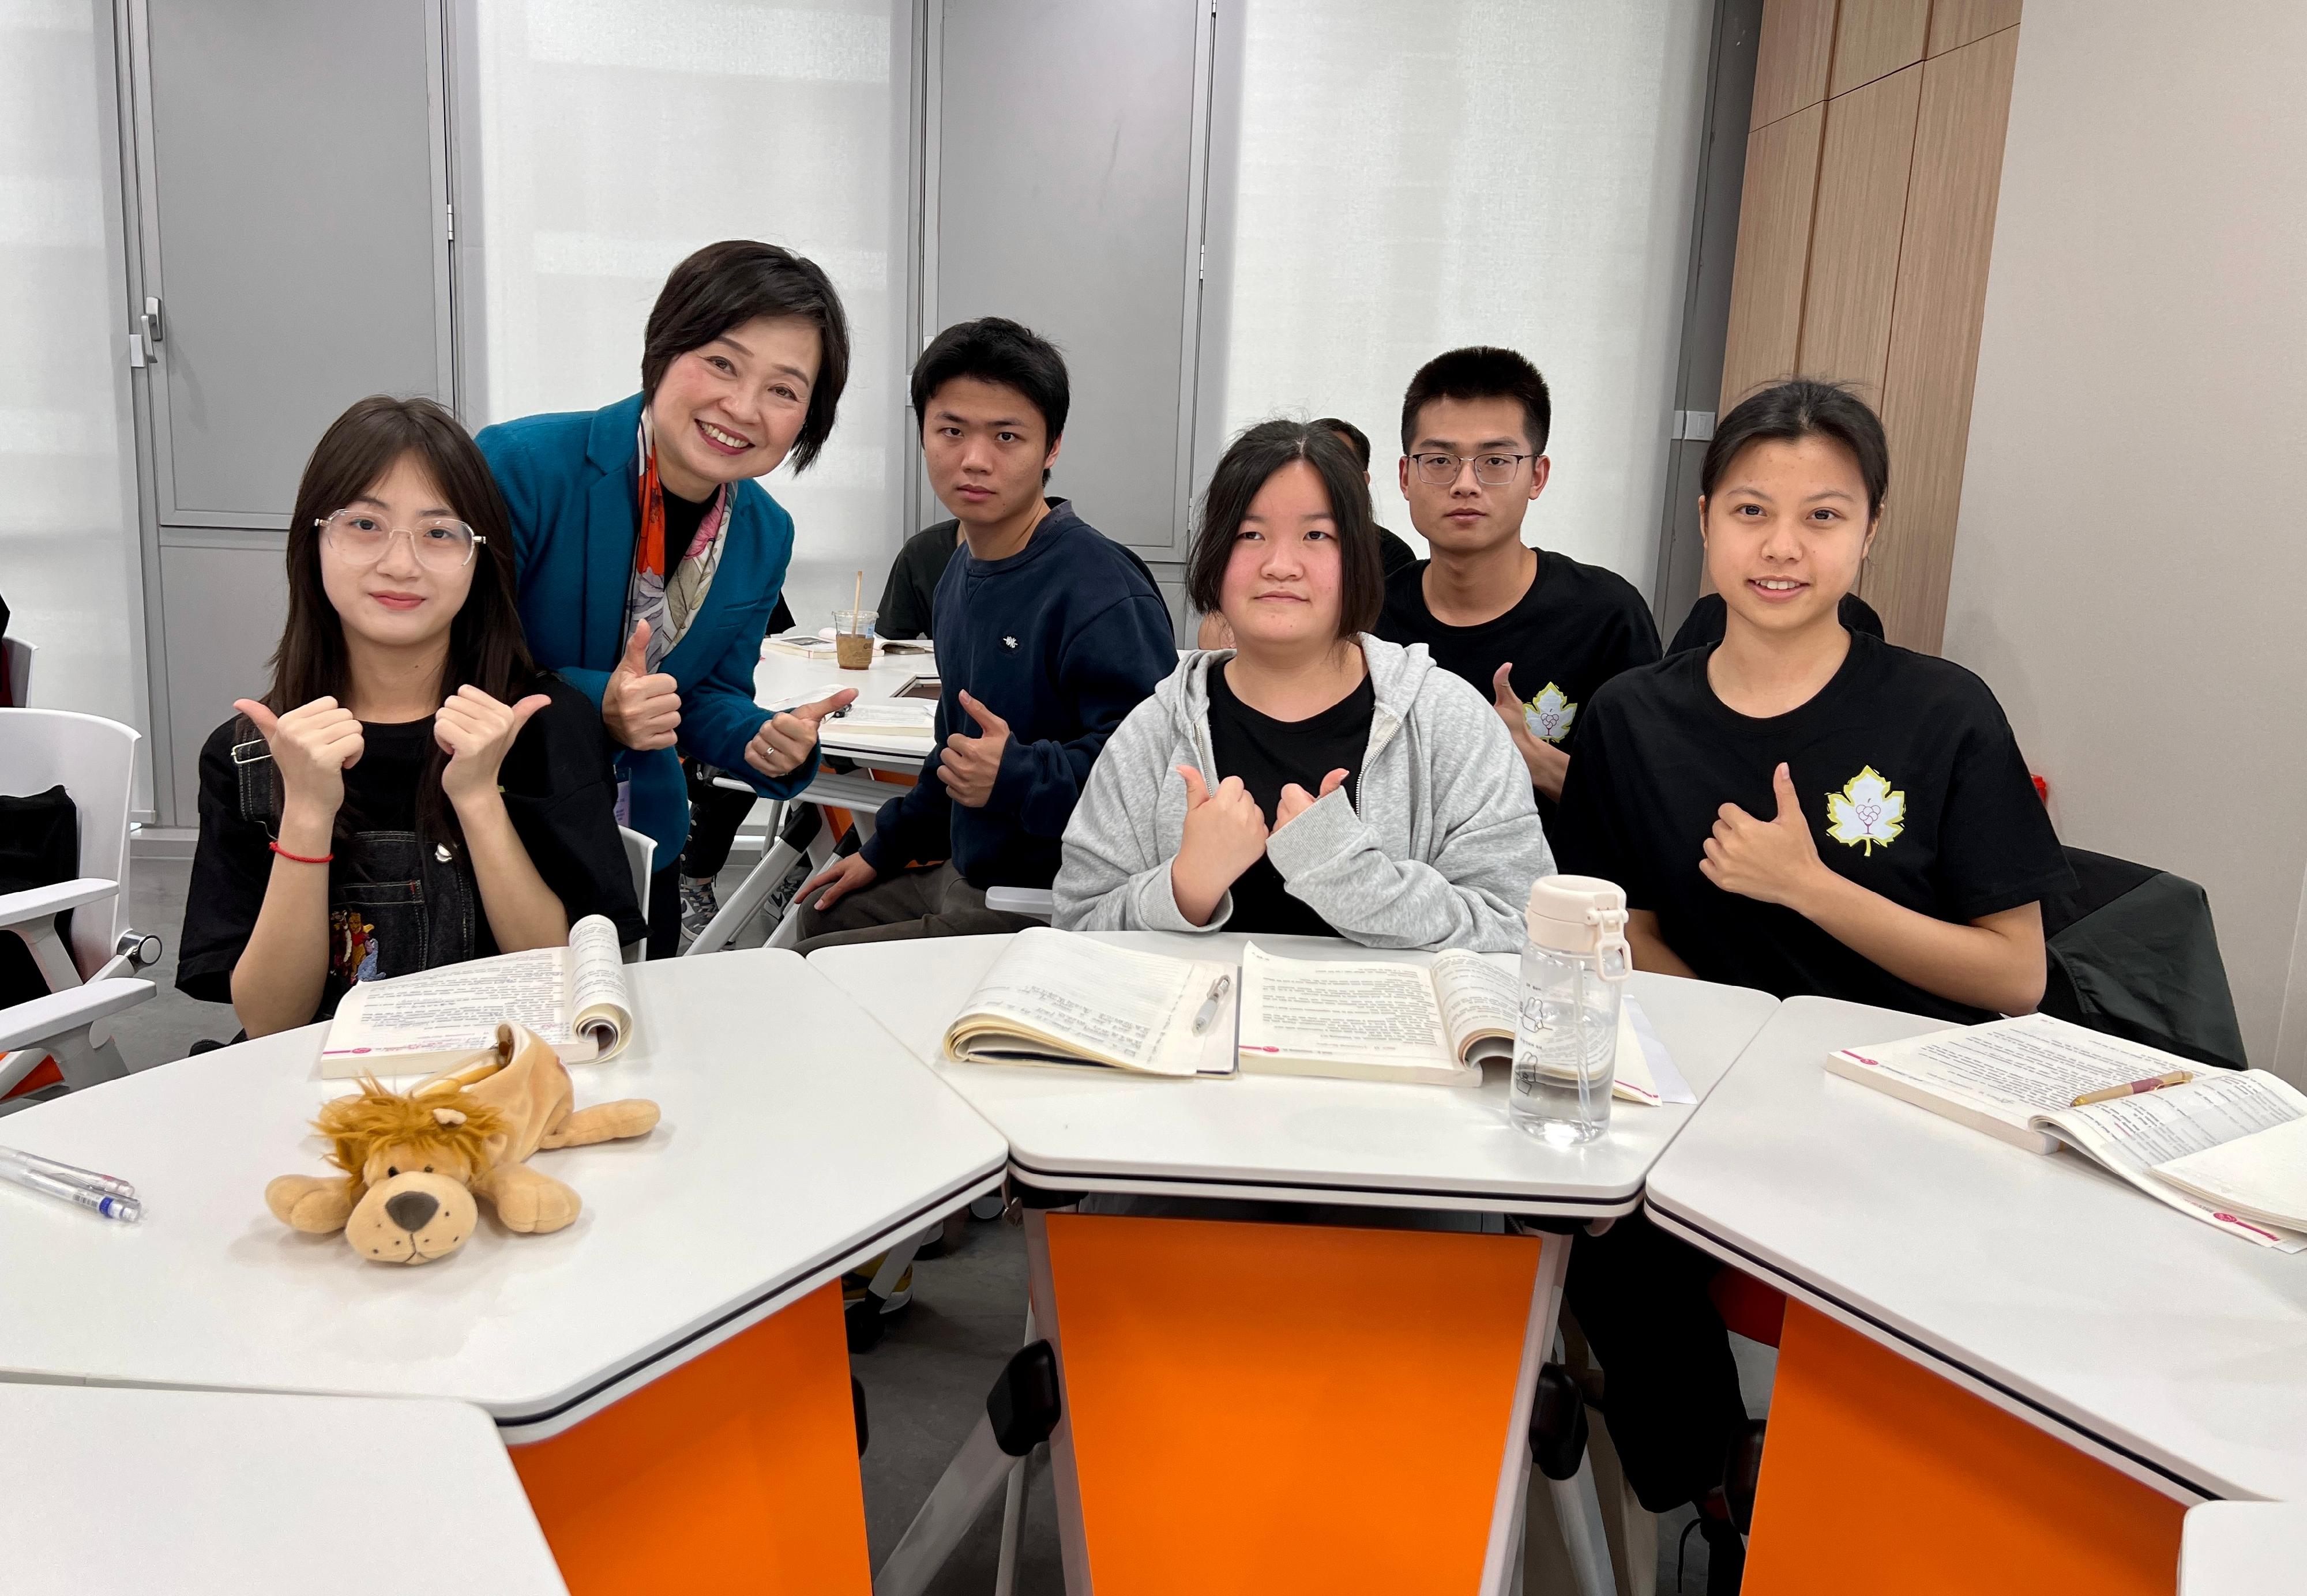 The Secretary for Education, Dr Choi Yuk-lin, visited the Guangdong-Hong Kong-Macao Greater Bay Area Vocational Education Park in Shenzhen today (March 17). Photo shows Dr Choi (second left) with students at the Park.